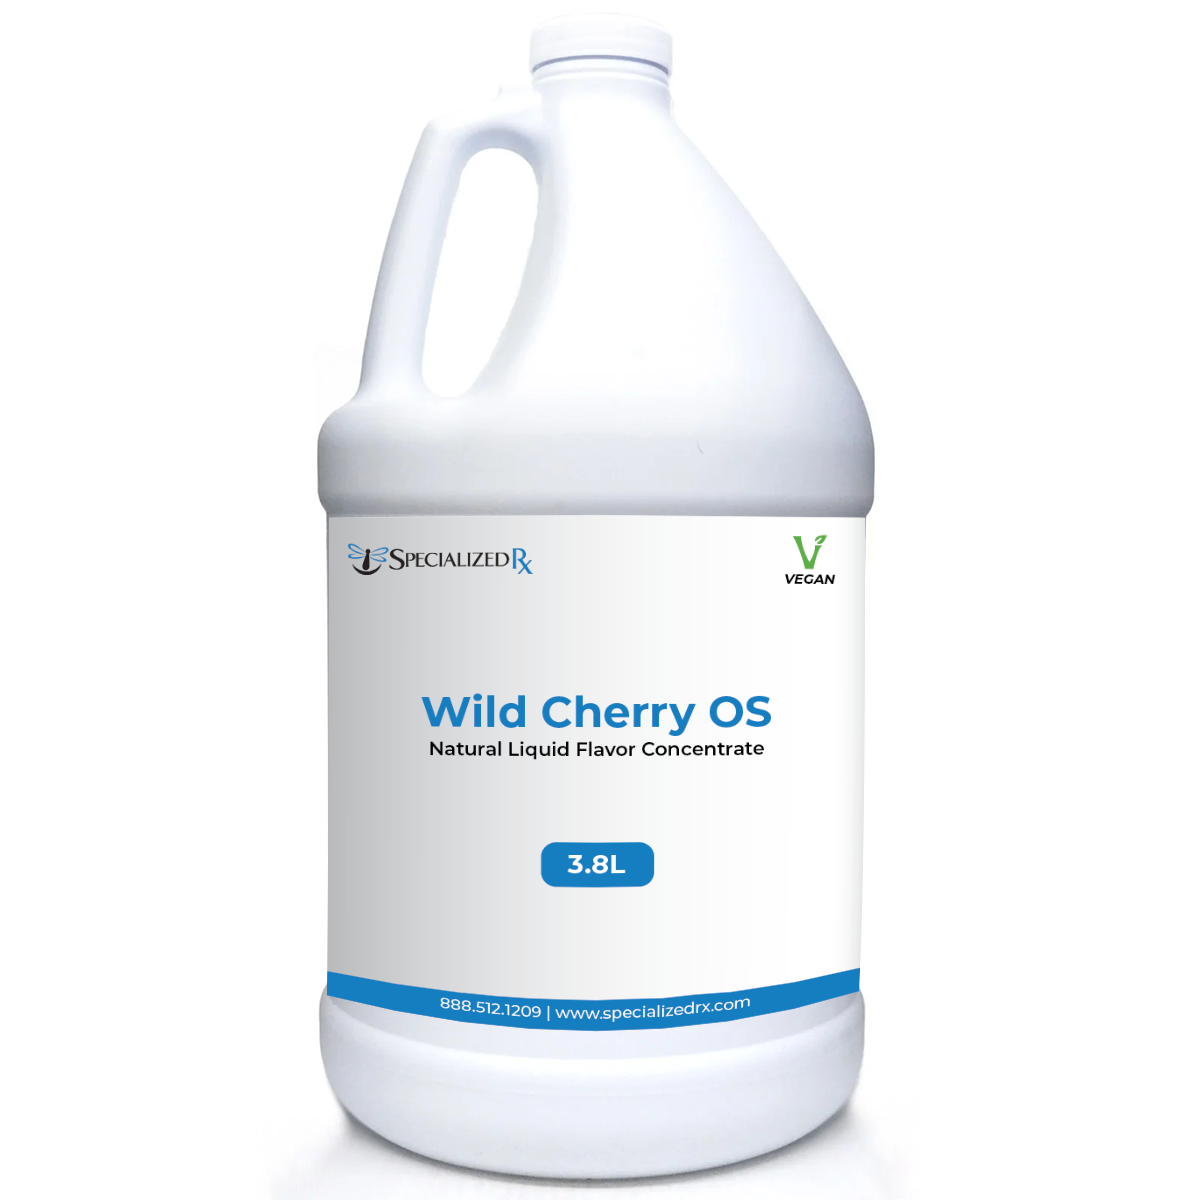 Wild Cherry OS Natural Liquid Flavor Concentrate